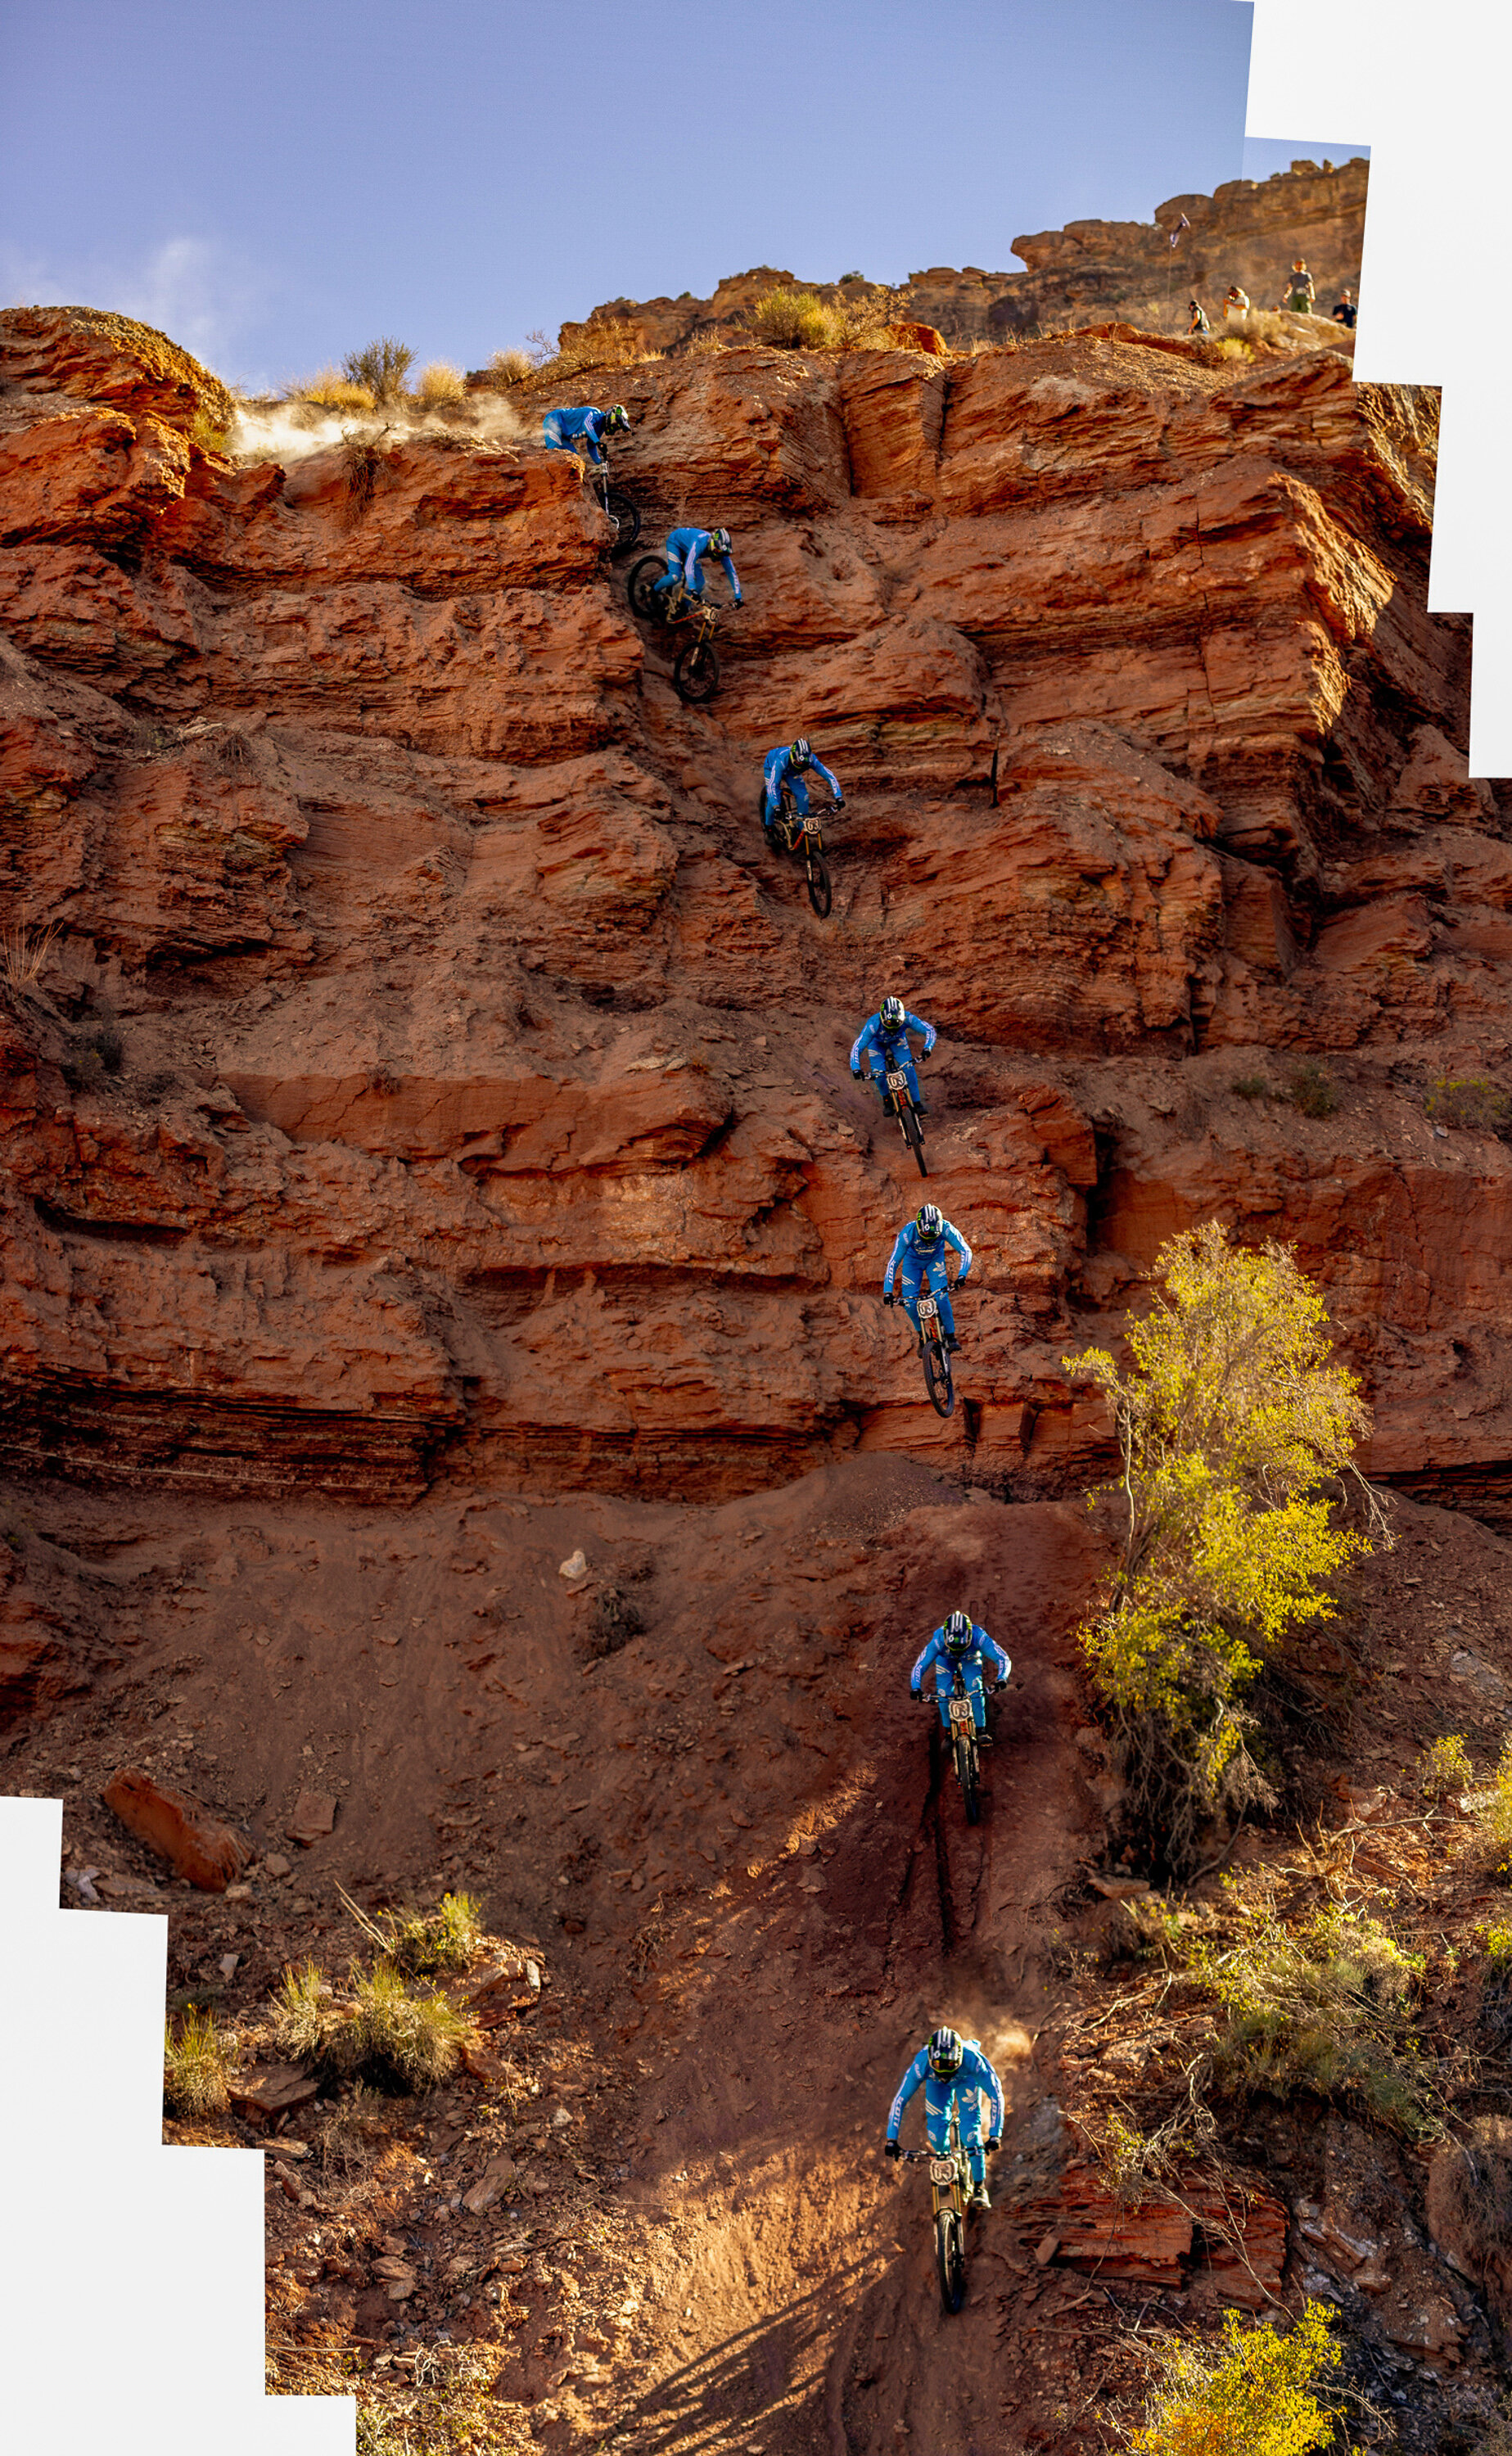  Brendan Fairclough drops into a steep and twisting chute feature at Red Bull Rampage in Virgin, Utah October 26th, 2018. 